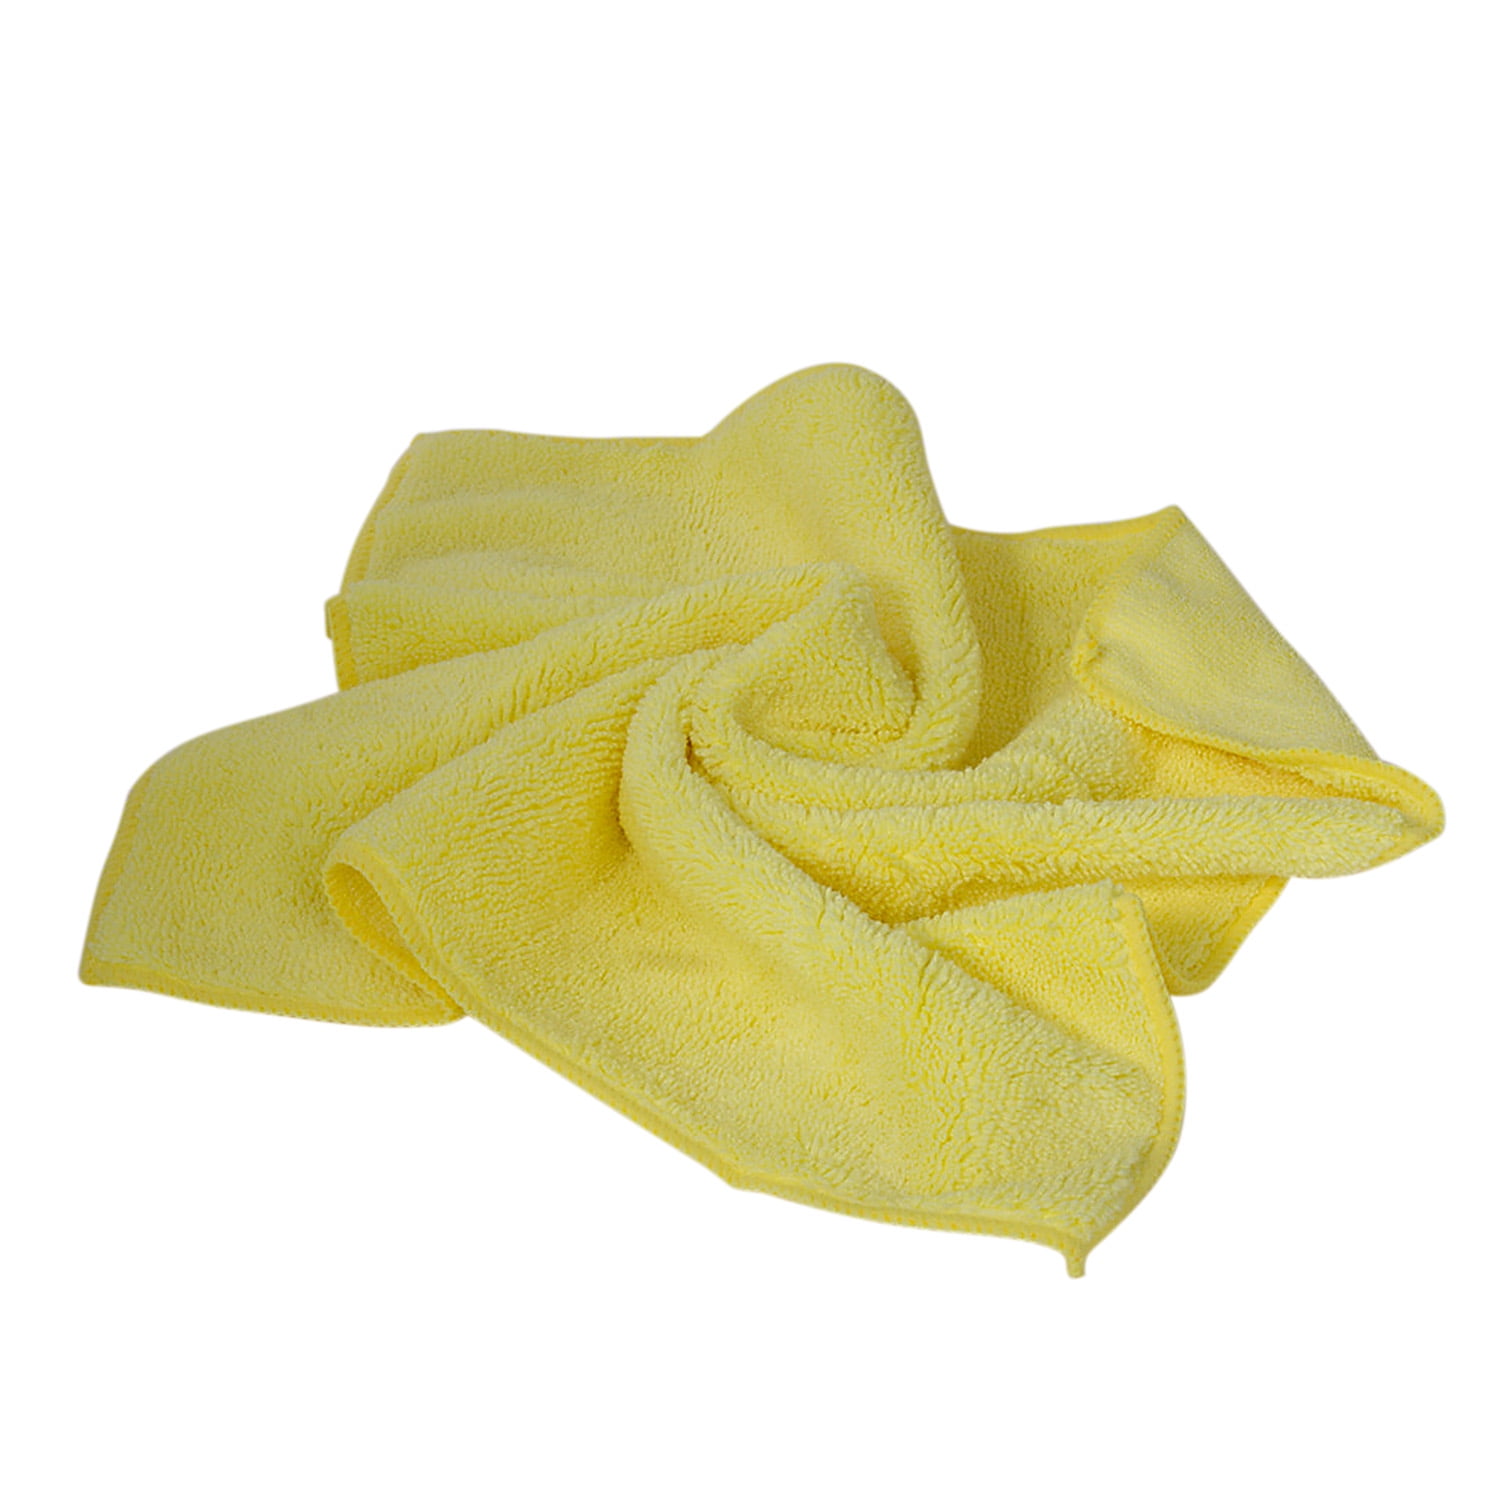 CAR CLEANING DETAILING WASHING MICROFIBRE MICROFIBER CLOTH TOWEL YELLOW PACK X48 